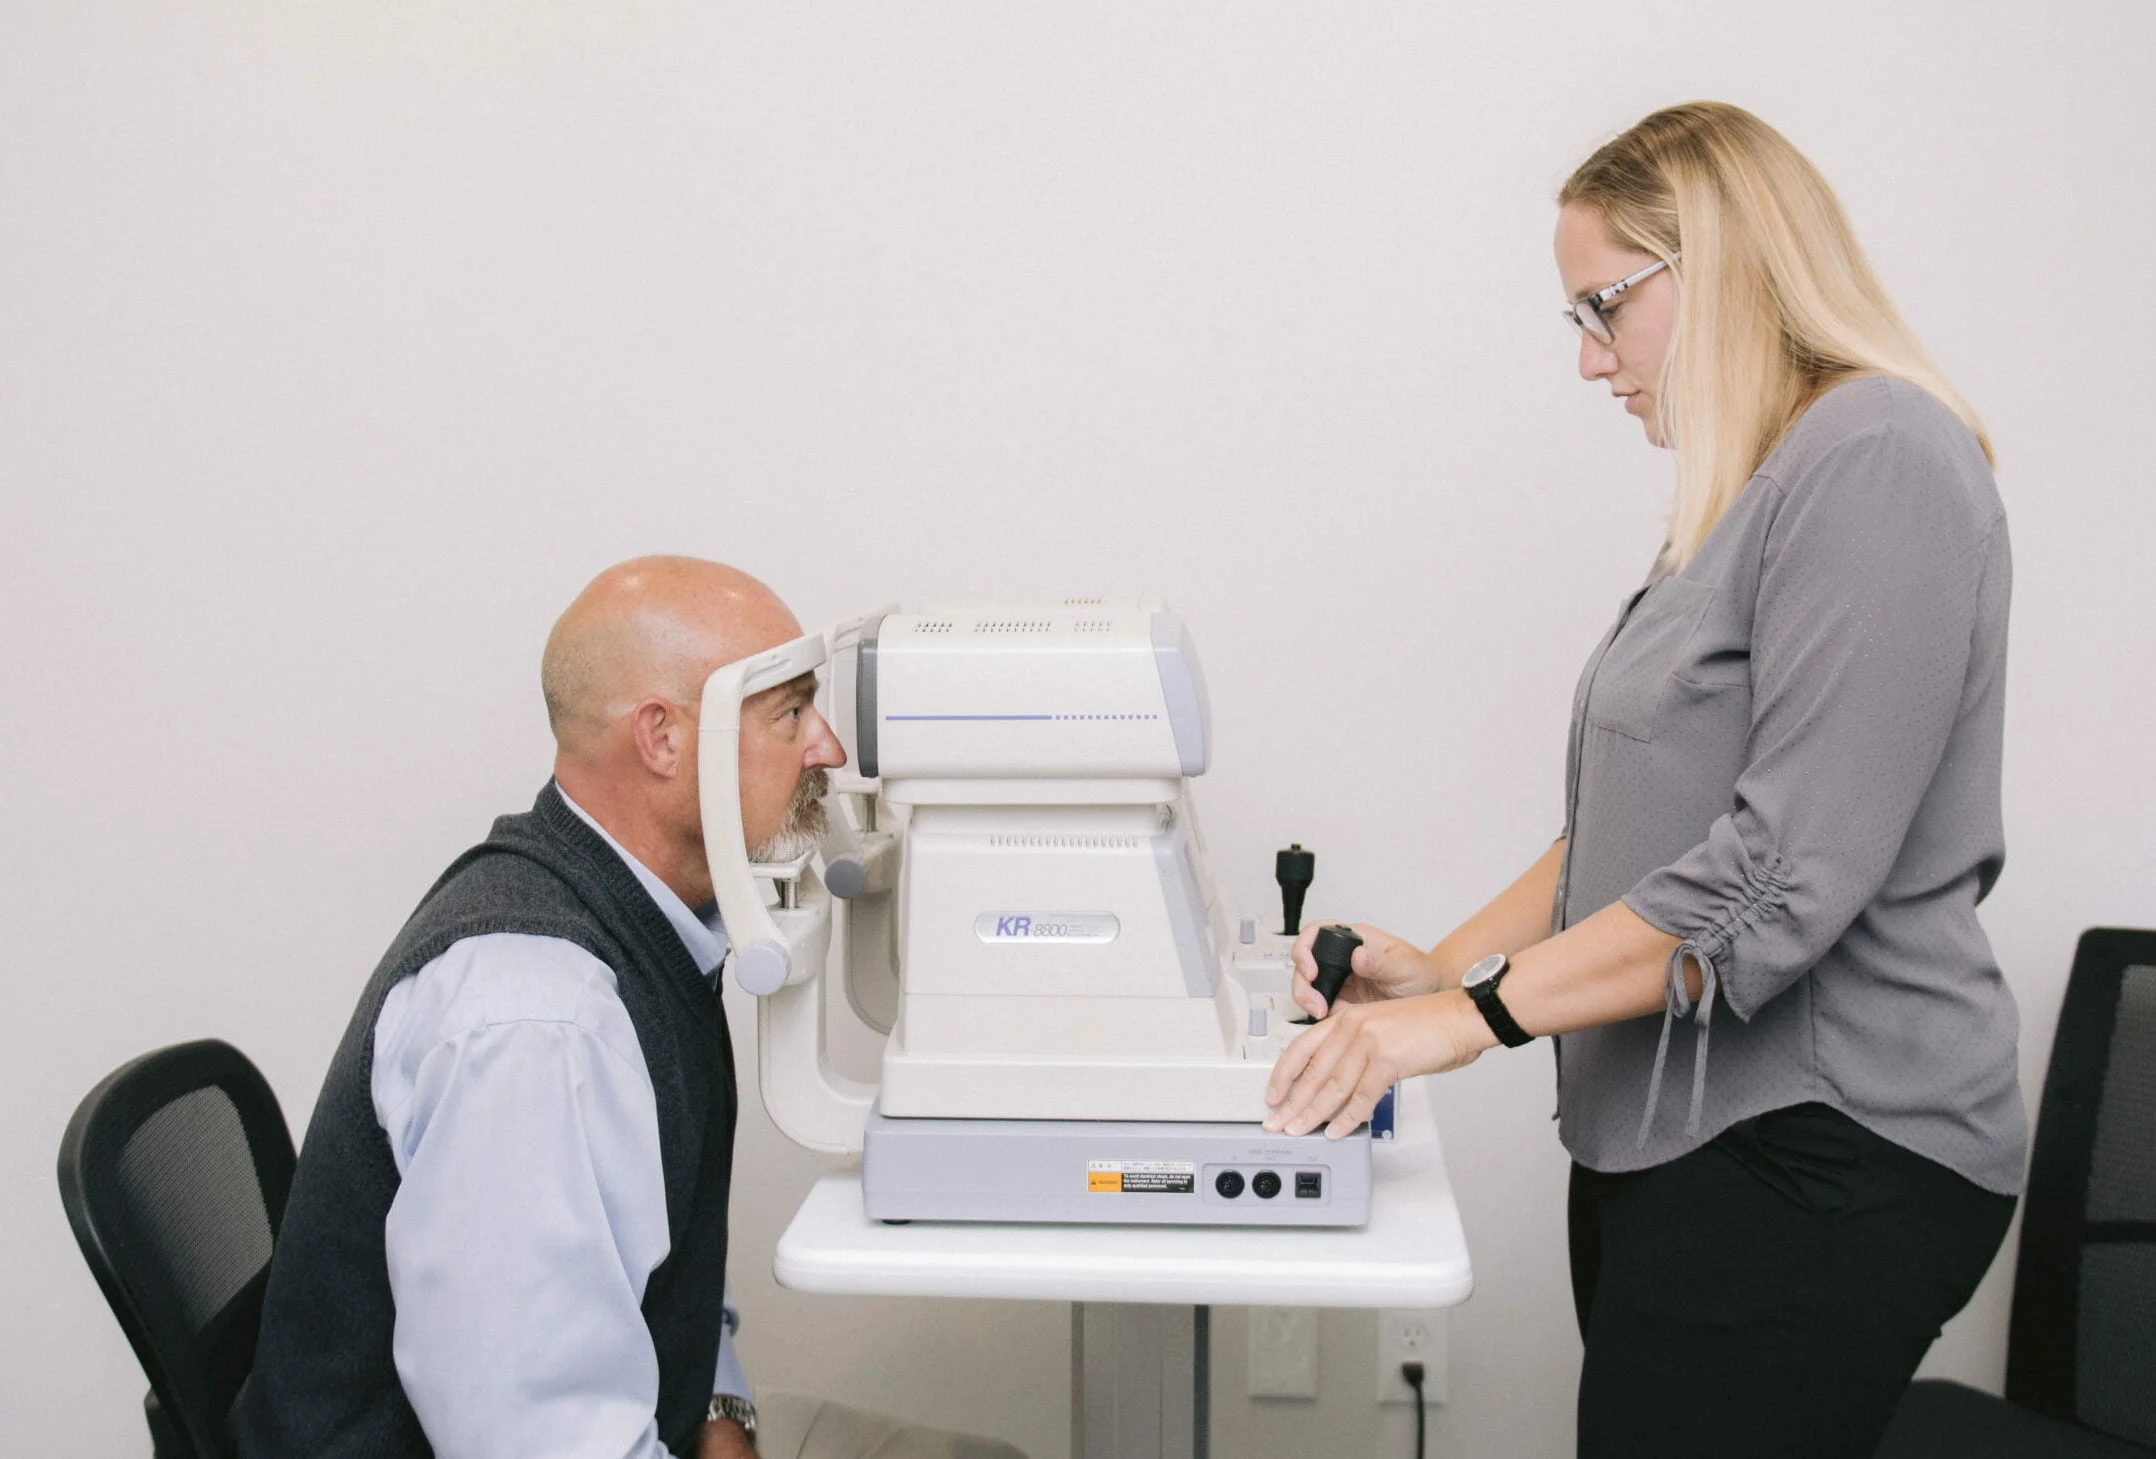 Glaucoma | How Early Detection Saves Vision